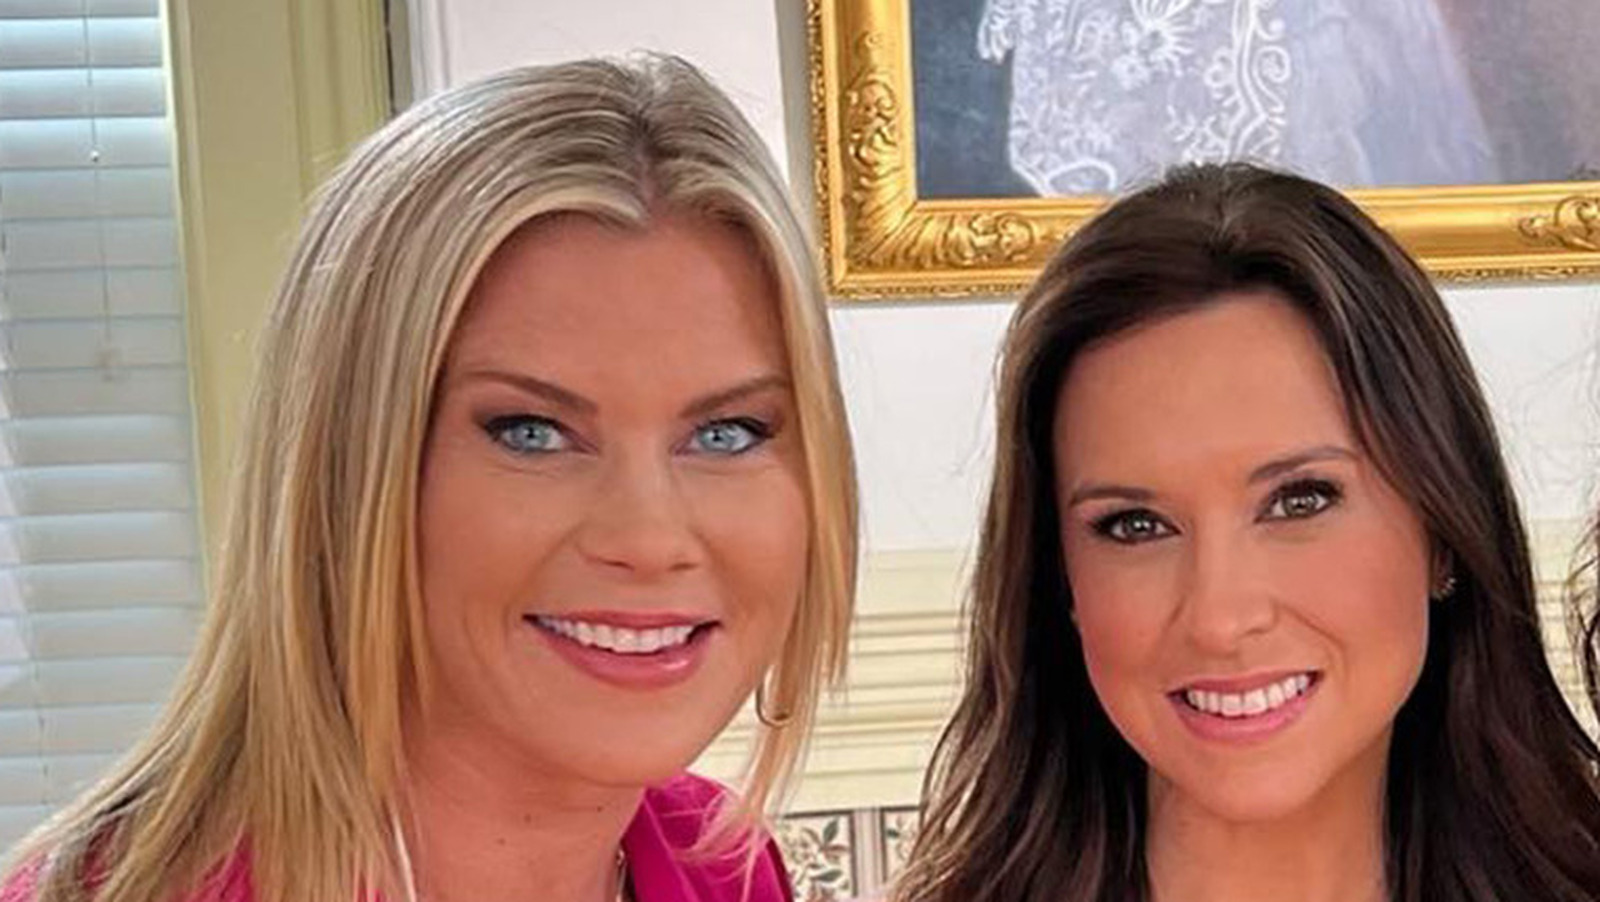 Are Hallmark Stars Alison Sweeney And Lacey Chabert Friends In Real Life?